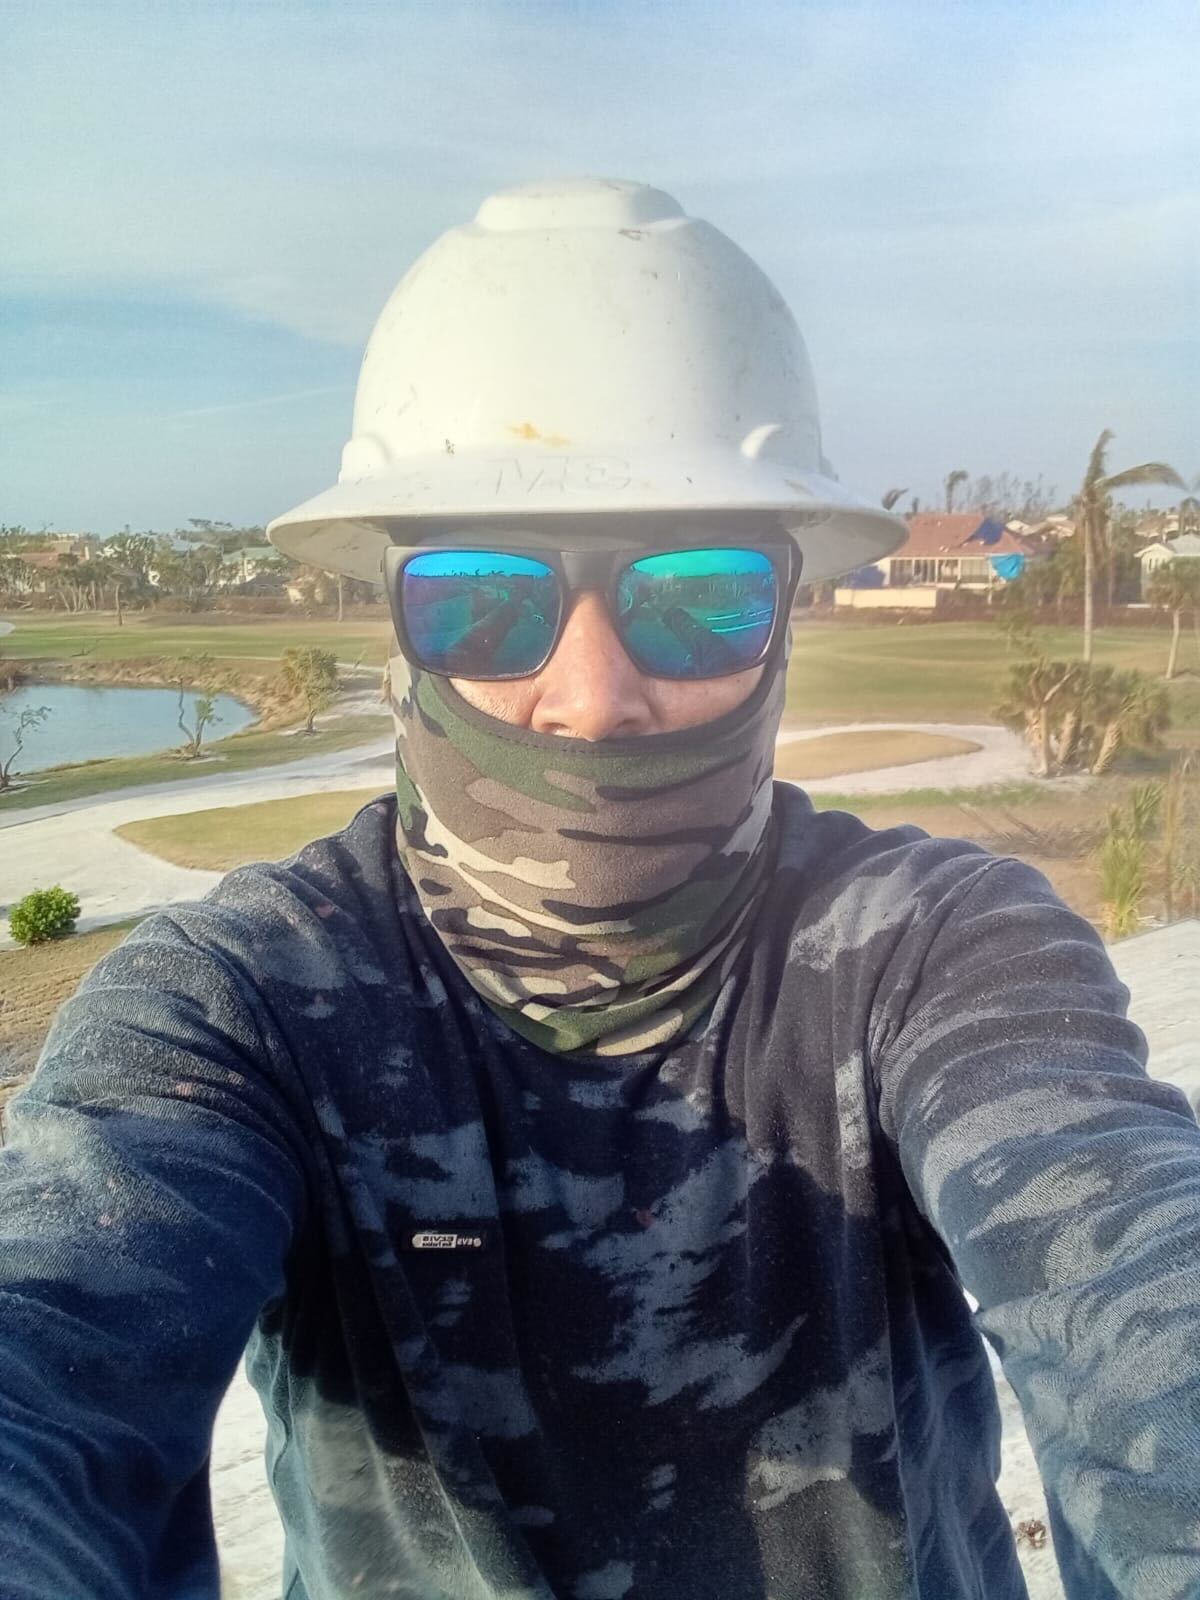 Marcos, a disaster restoration worker in Florida, poses for a selfie at work. He is wearing a white hardhat, sunglasses and a camouflage-print face covering and matching camouflage long-sleeve shirt.